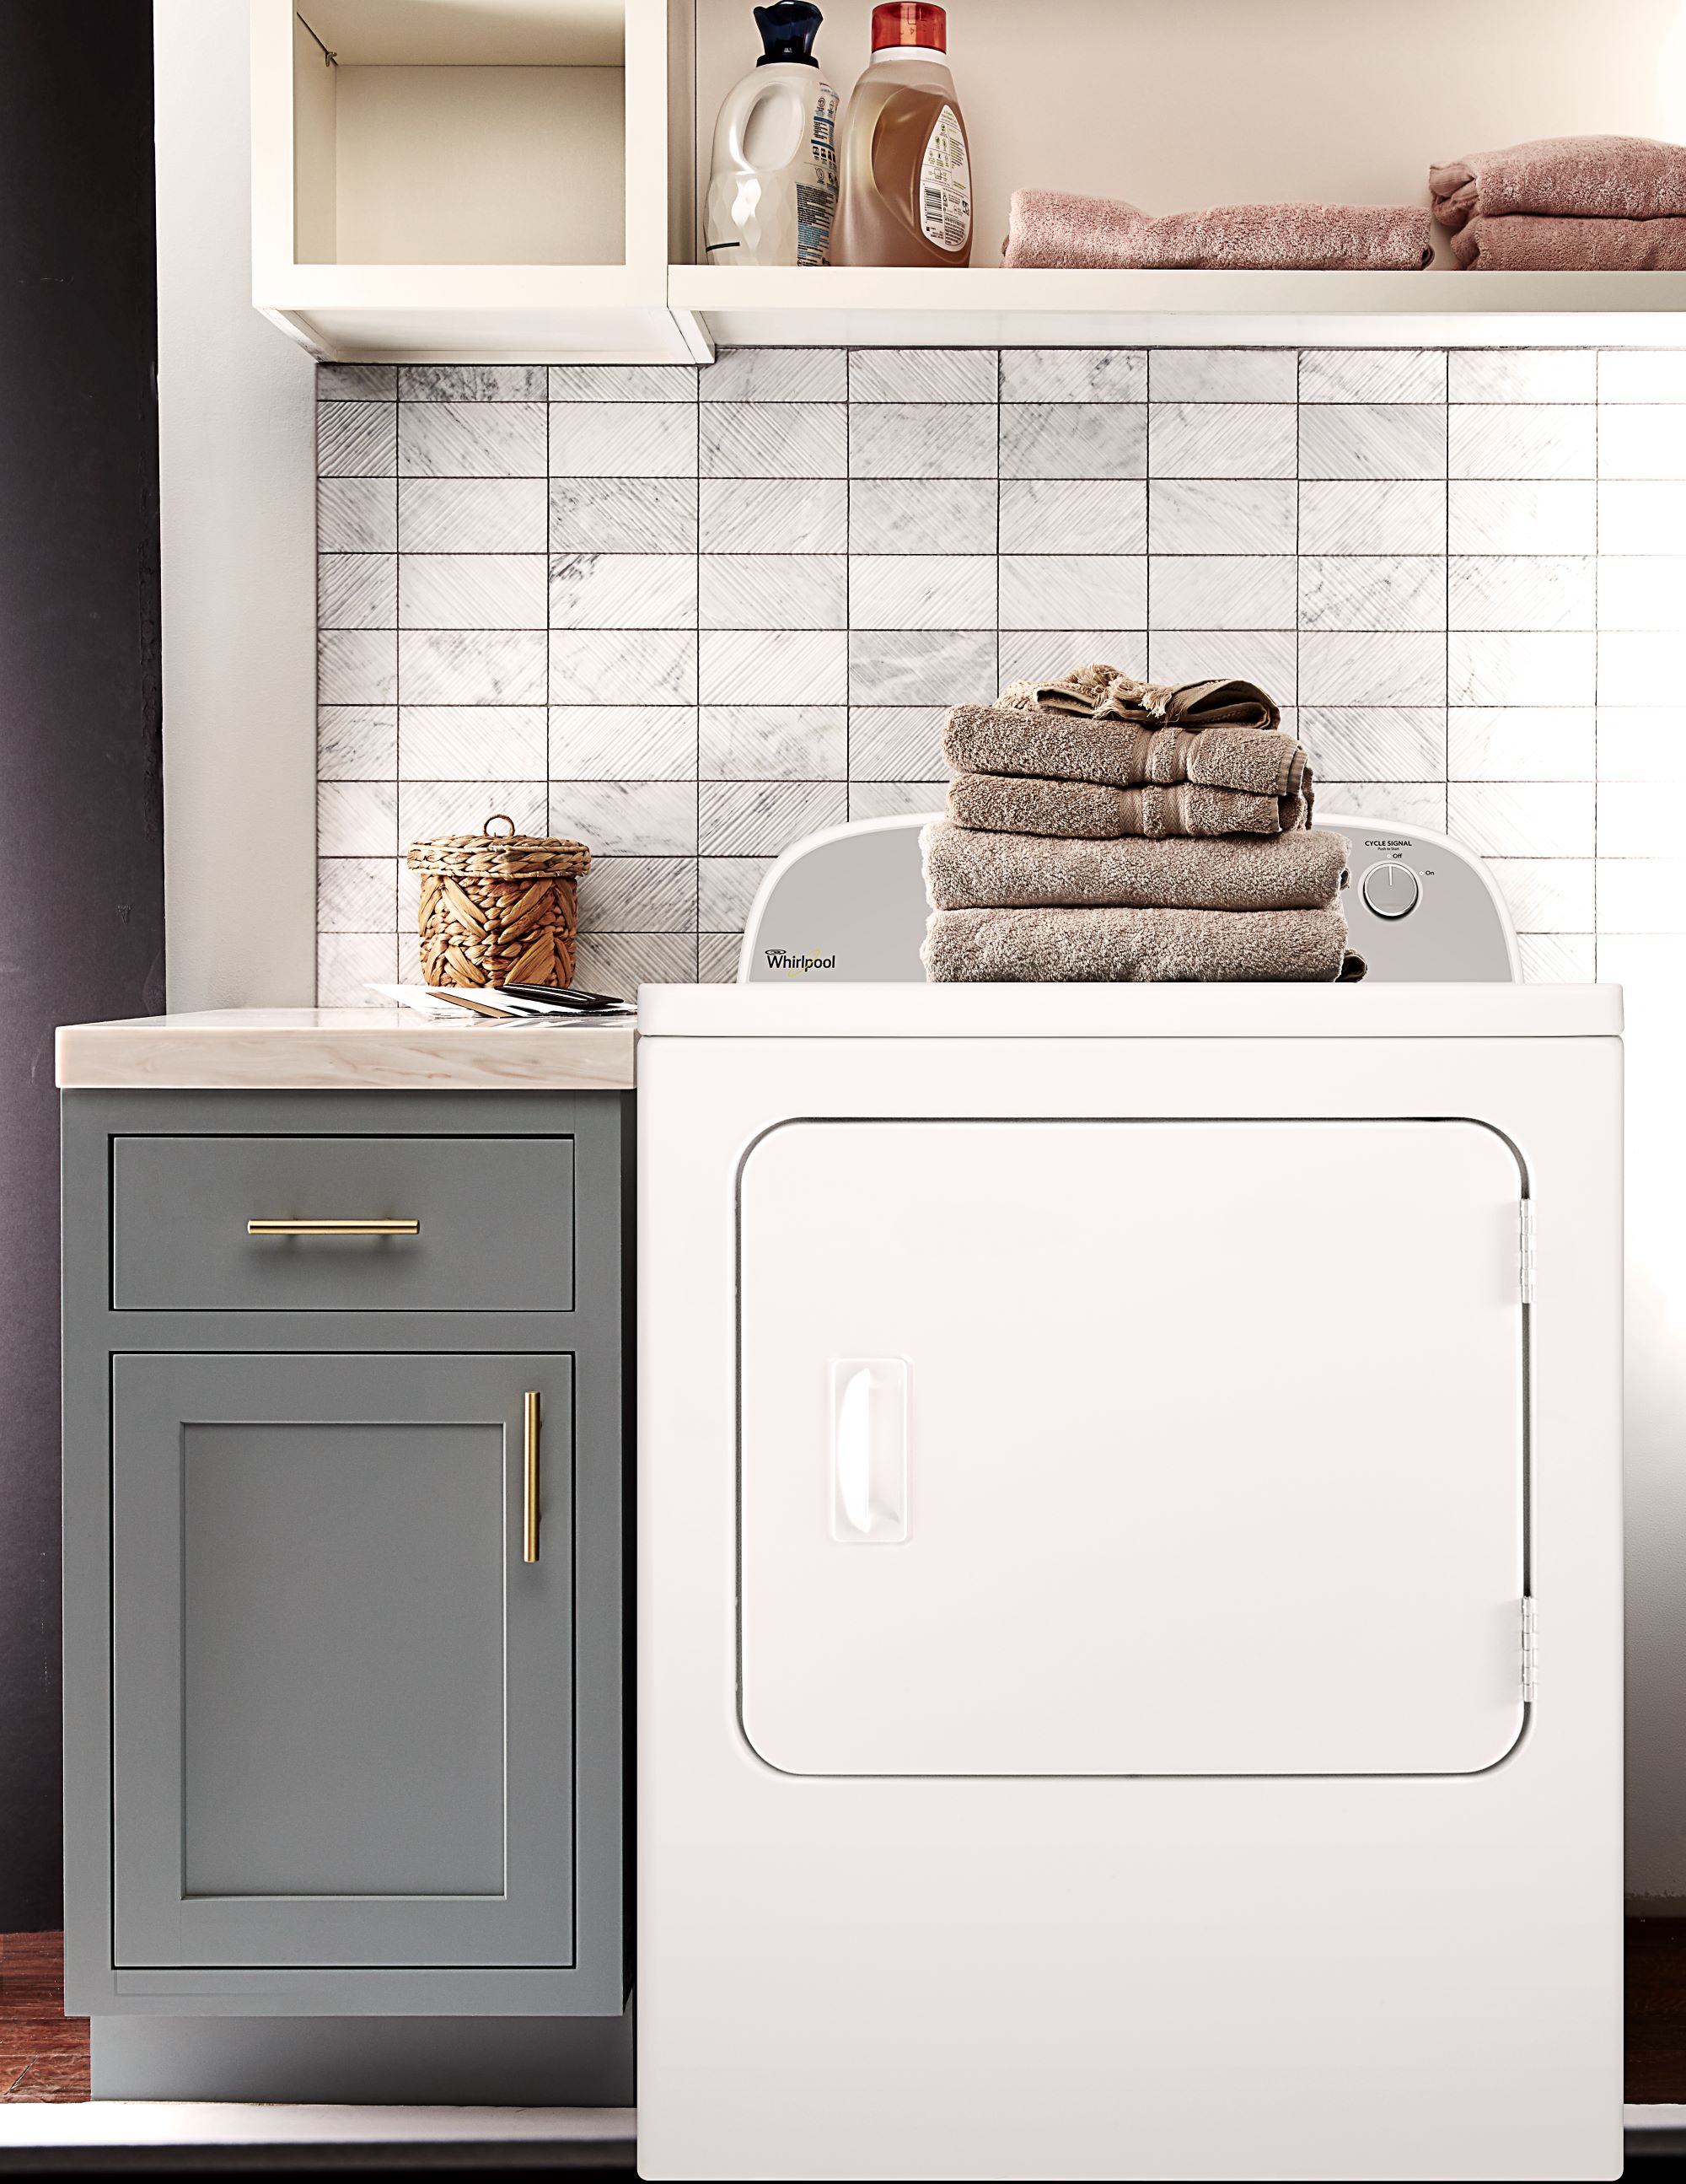 WCC31430AW in White by Whirlpool in Wichita Falls, TX - Whirlpool